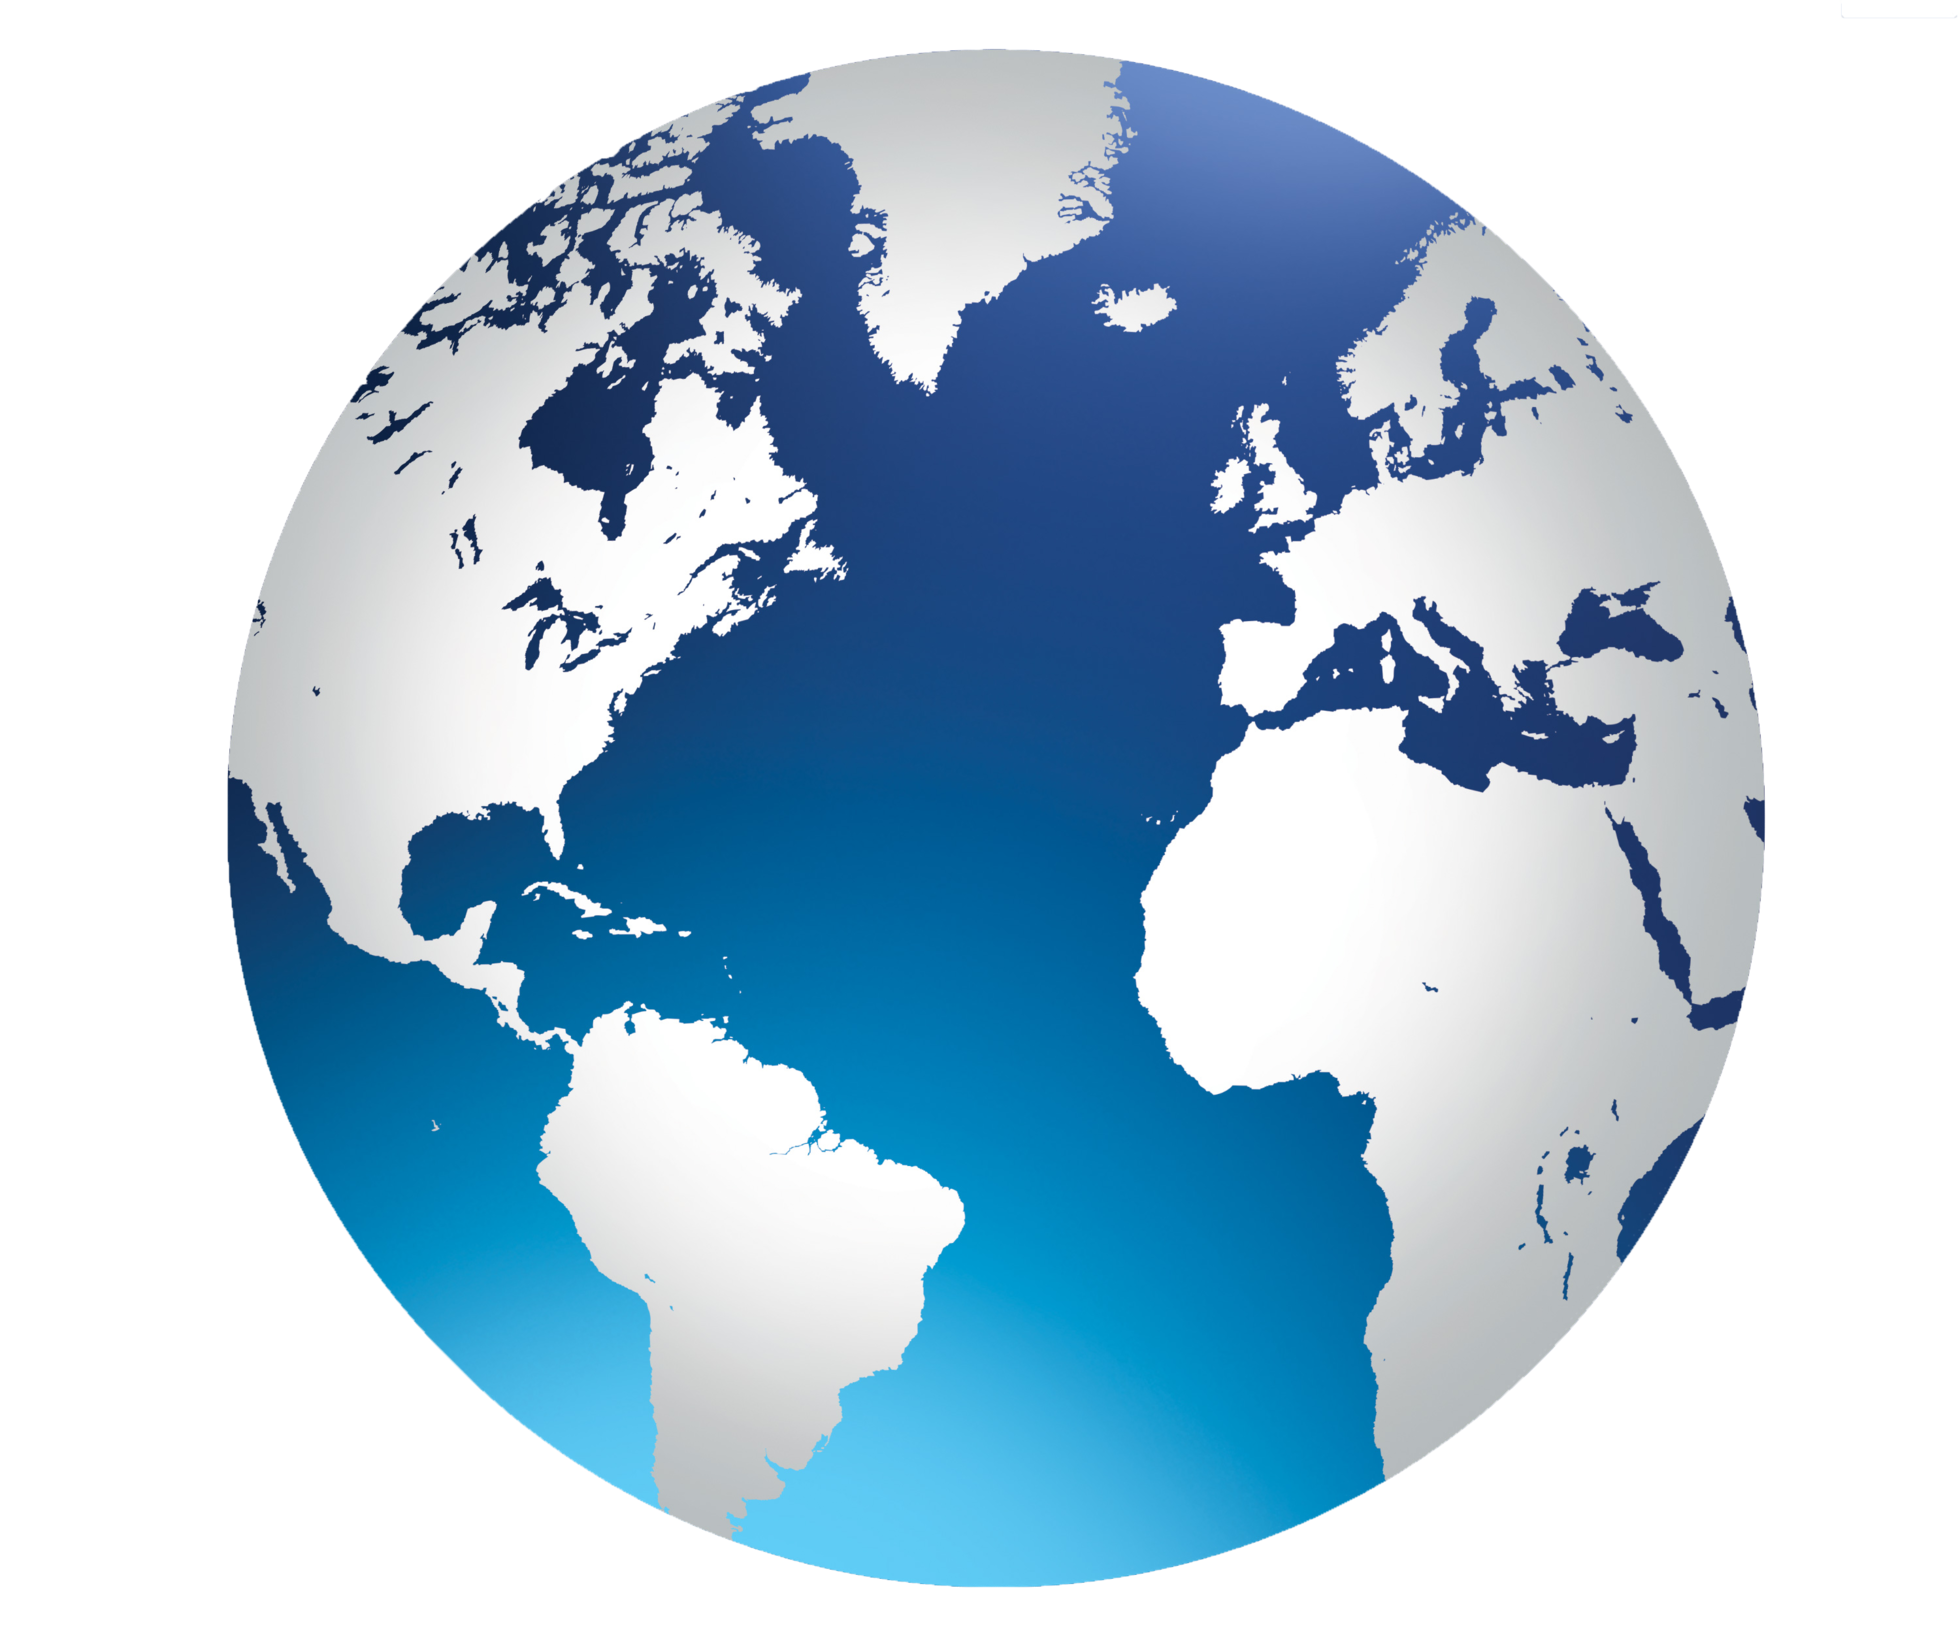 Earth Globe Image Free Clipart HQ PNG Image